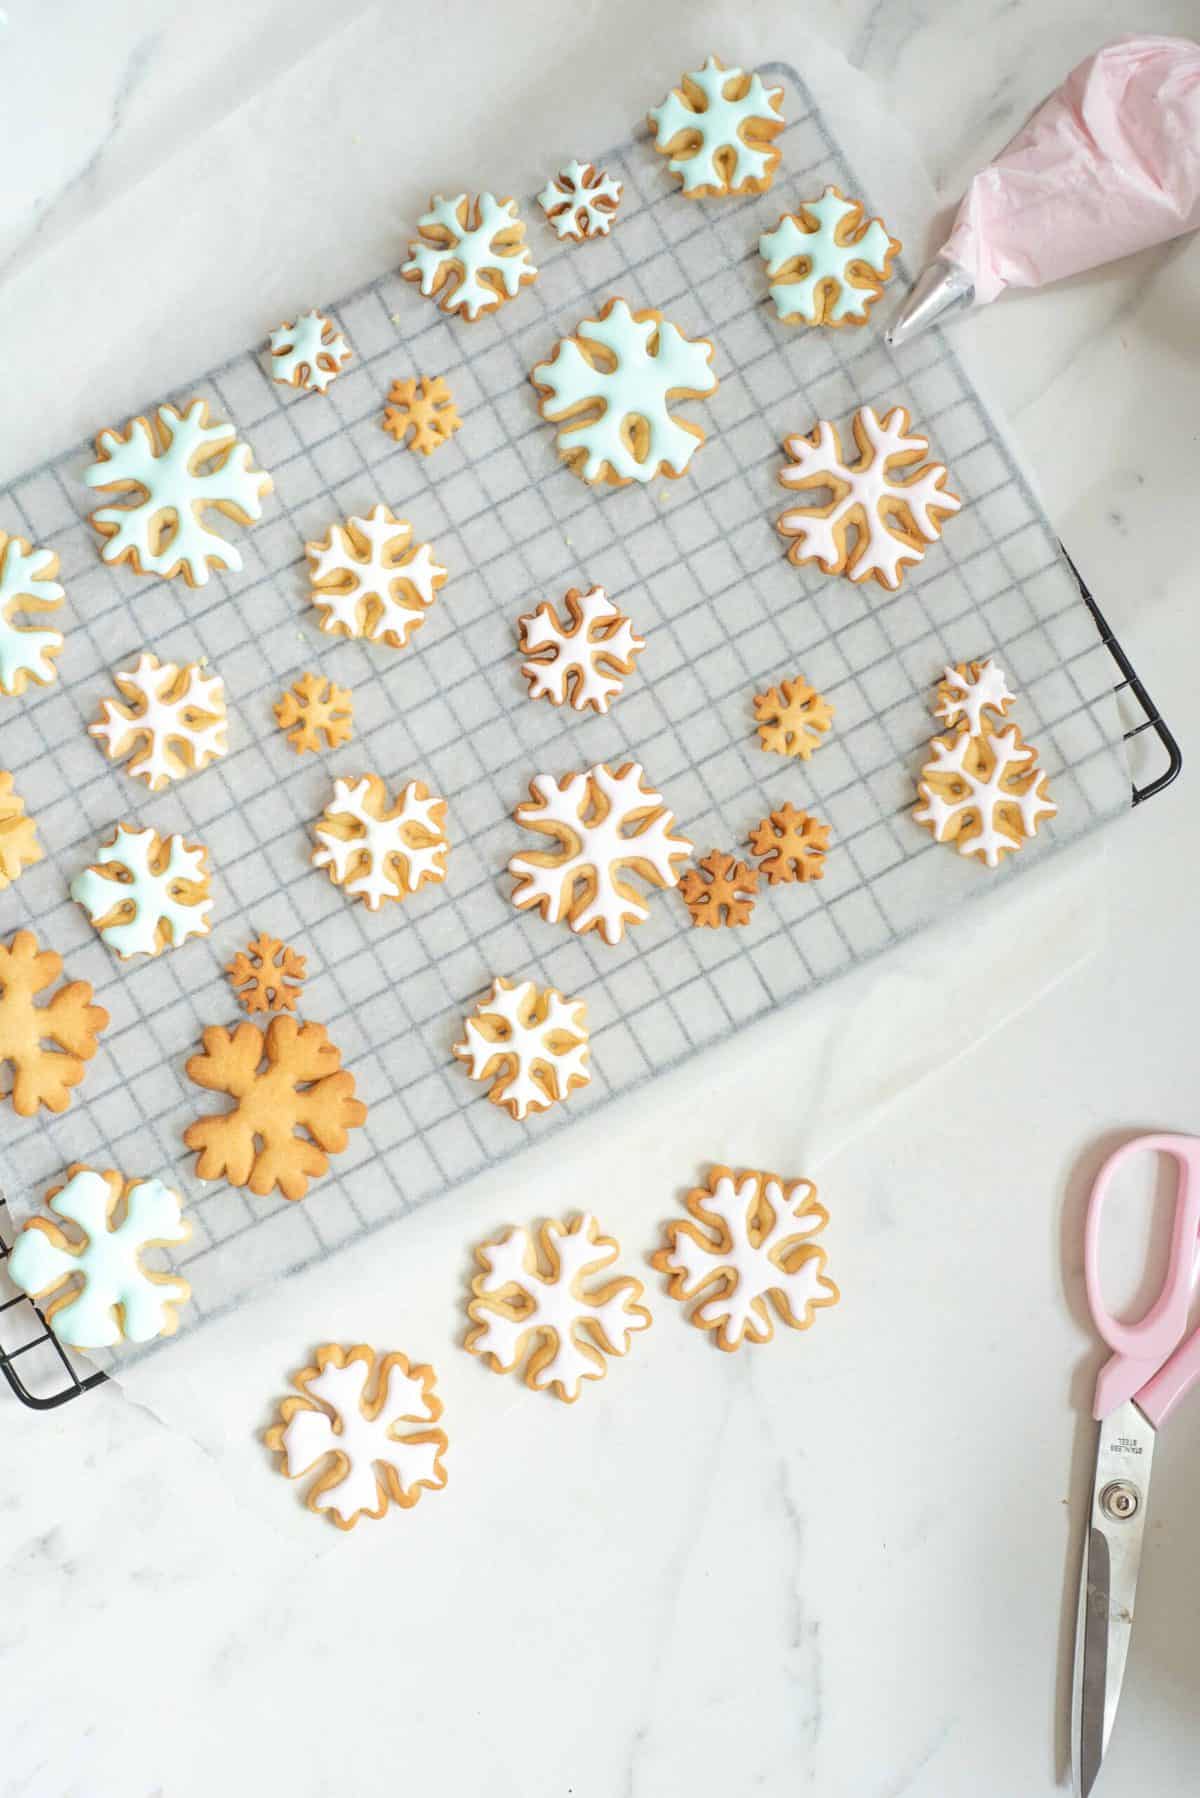 delicious decorated Christmas sugar cookie recipe. Orange sugar cookies made in fawn, snowflakes and tree shaped cookies. a yummy Christmas biscuits recipe